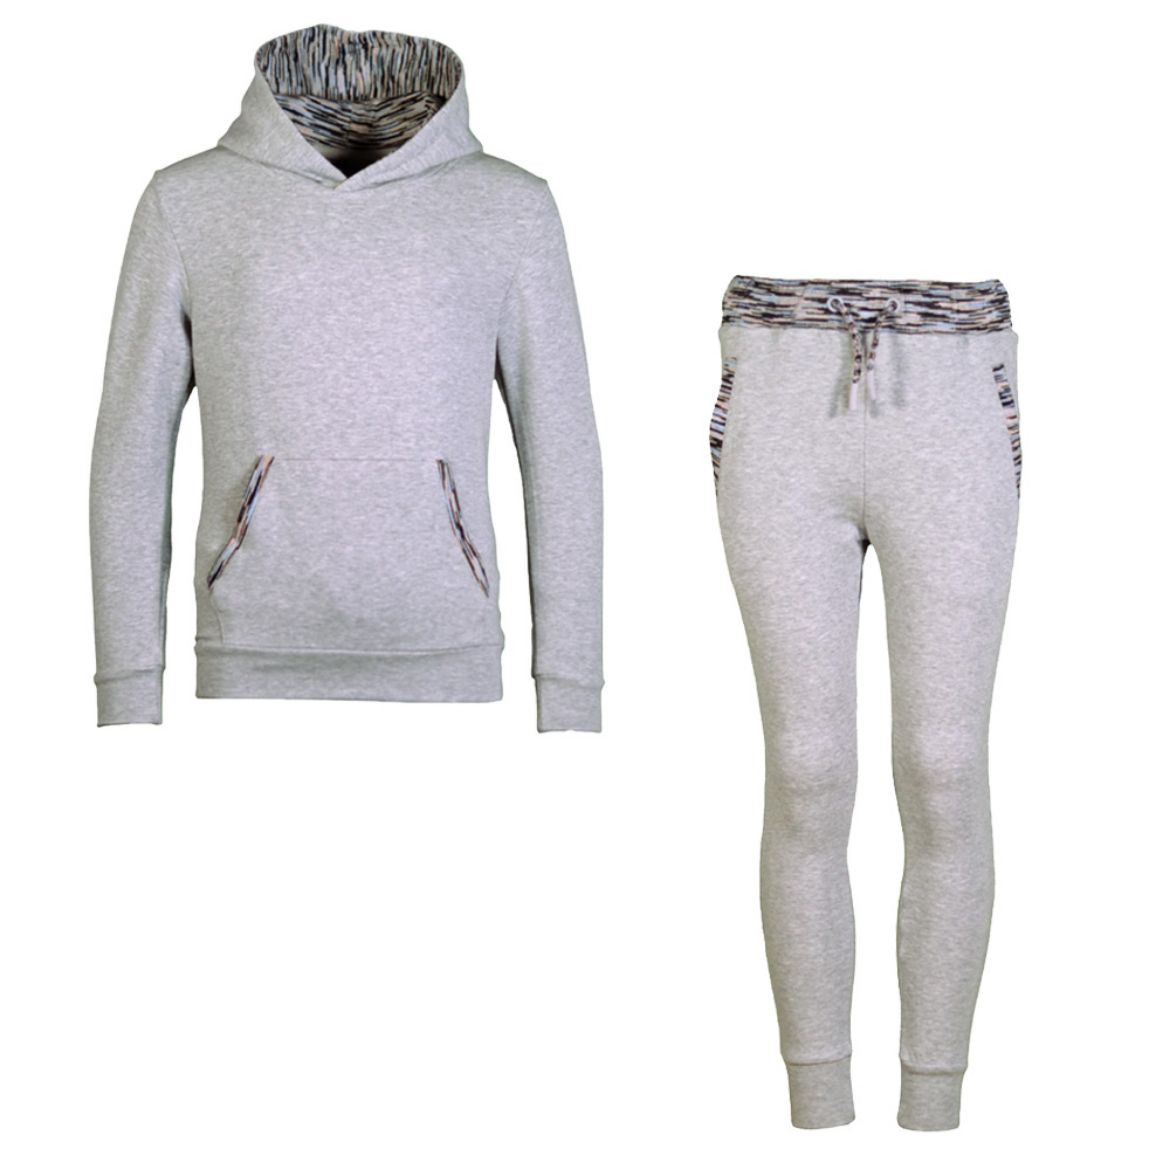 Picture of Moda Bandidos Boys Grey Tracksuit With Space Dye Trim